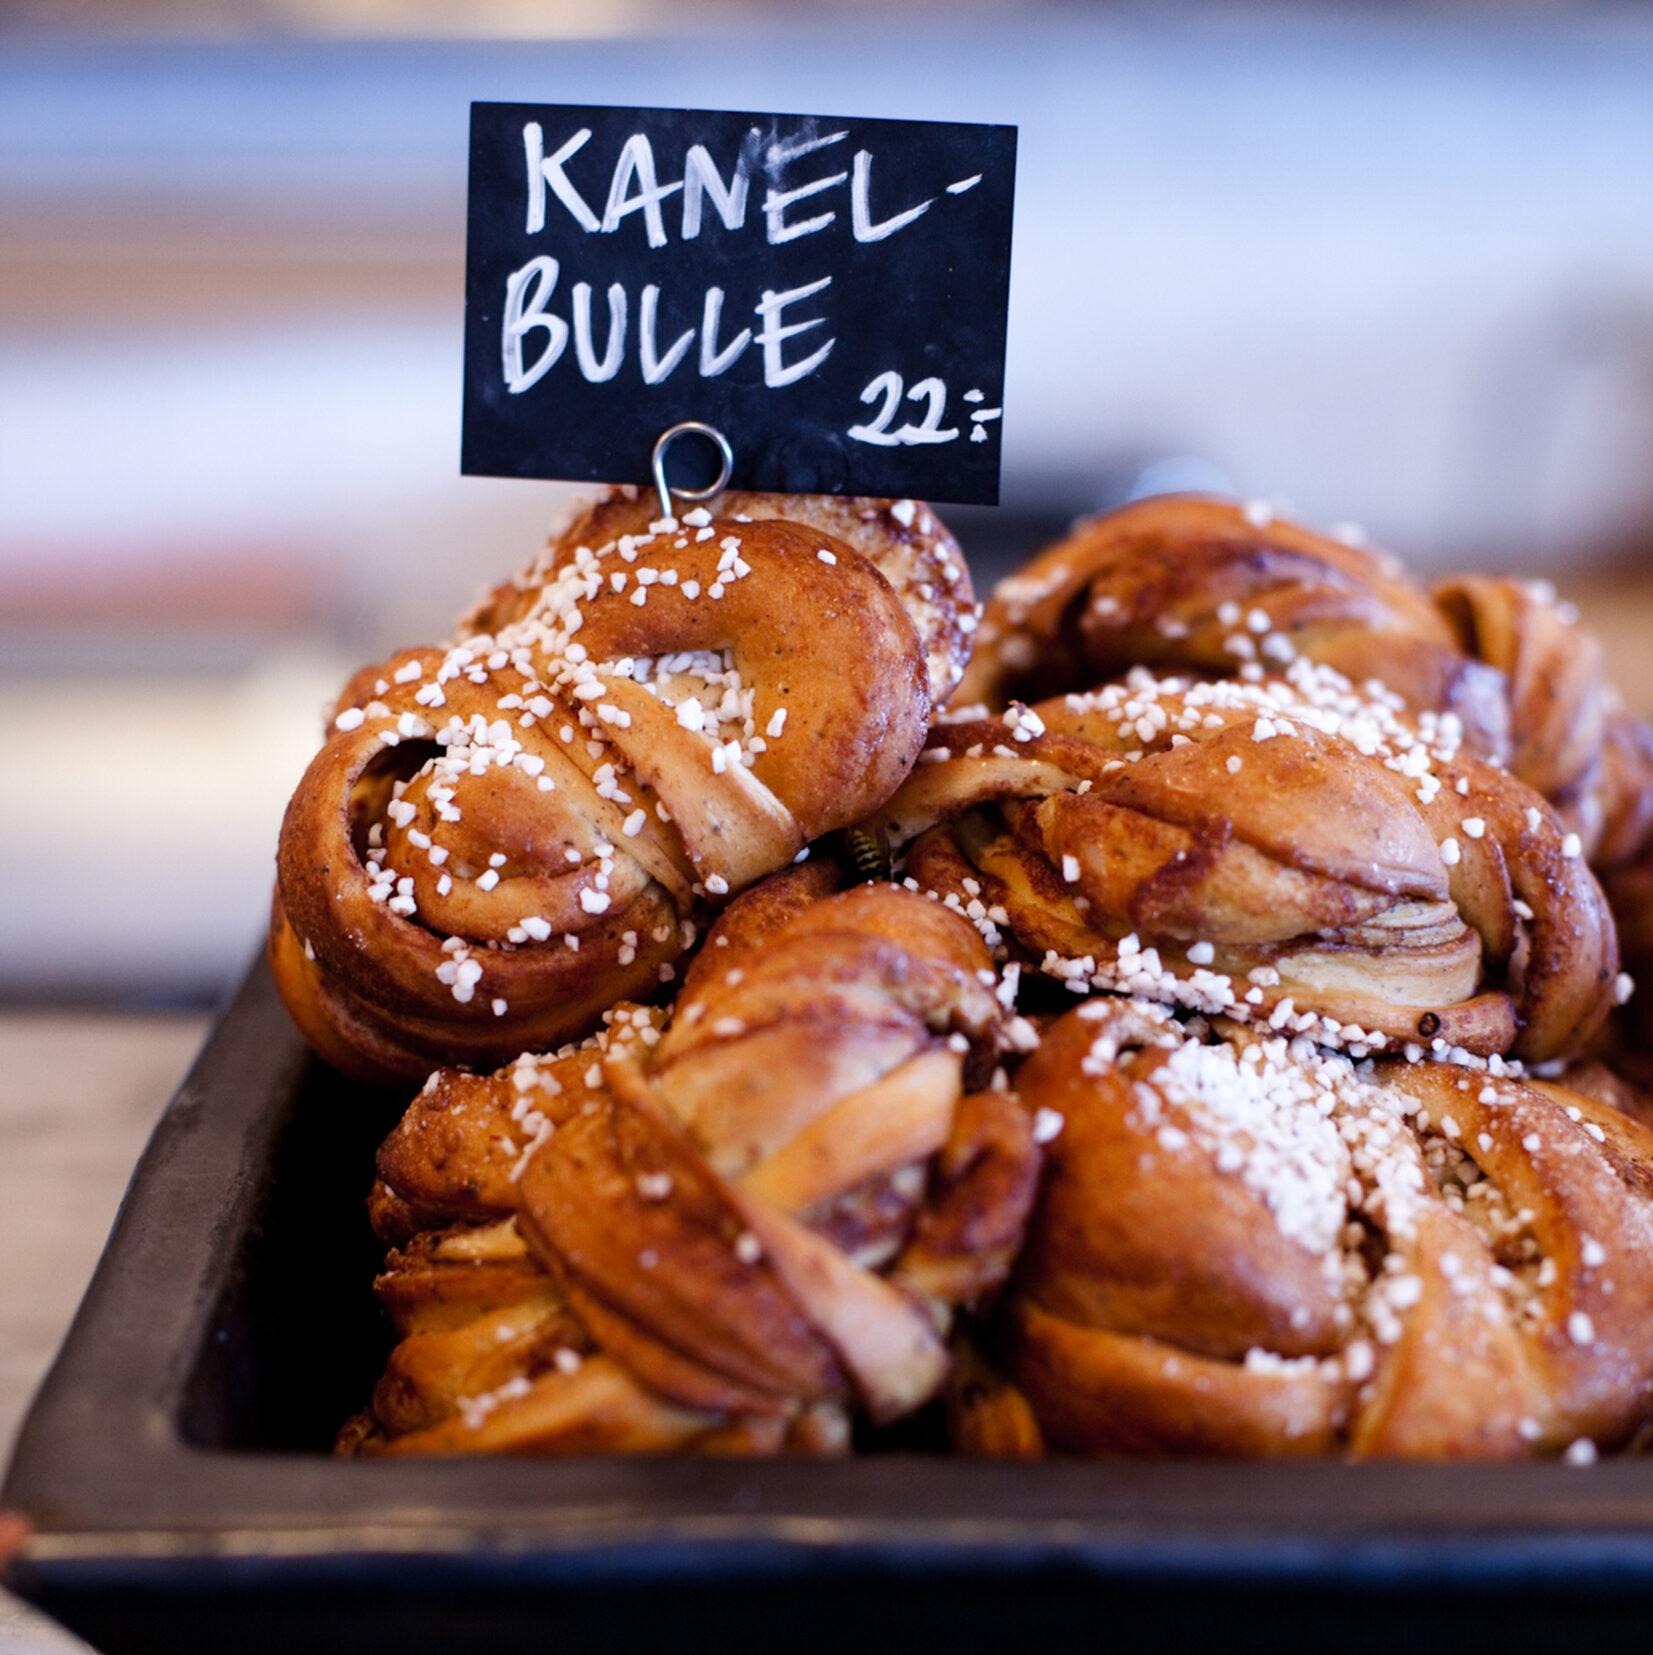 A tray of cinnamon buns on display with a handwritten sign reading 'Kanelbulle 22' which is the name for cinnamon bun in Swedish and the price. 'Kanelbulle' is an important part of the Swedish glossary.